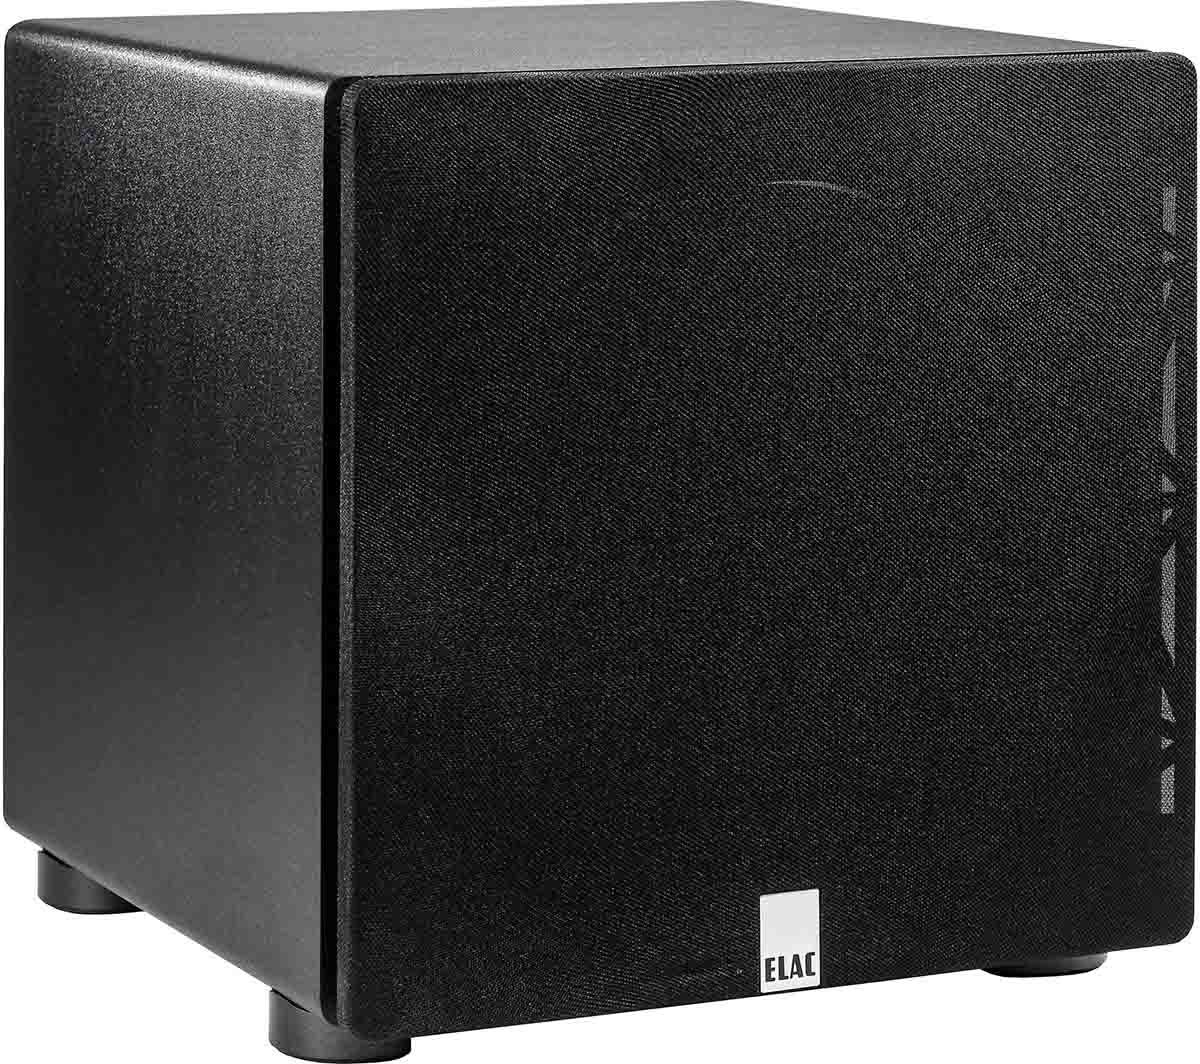 ELAC PS350 Left Front View Covered in Black Ask